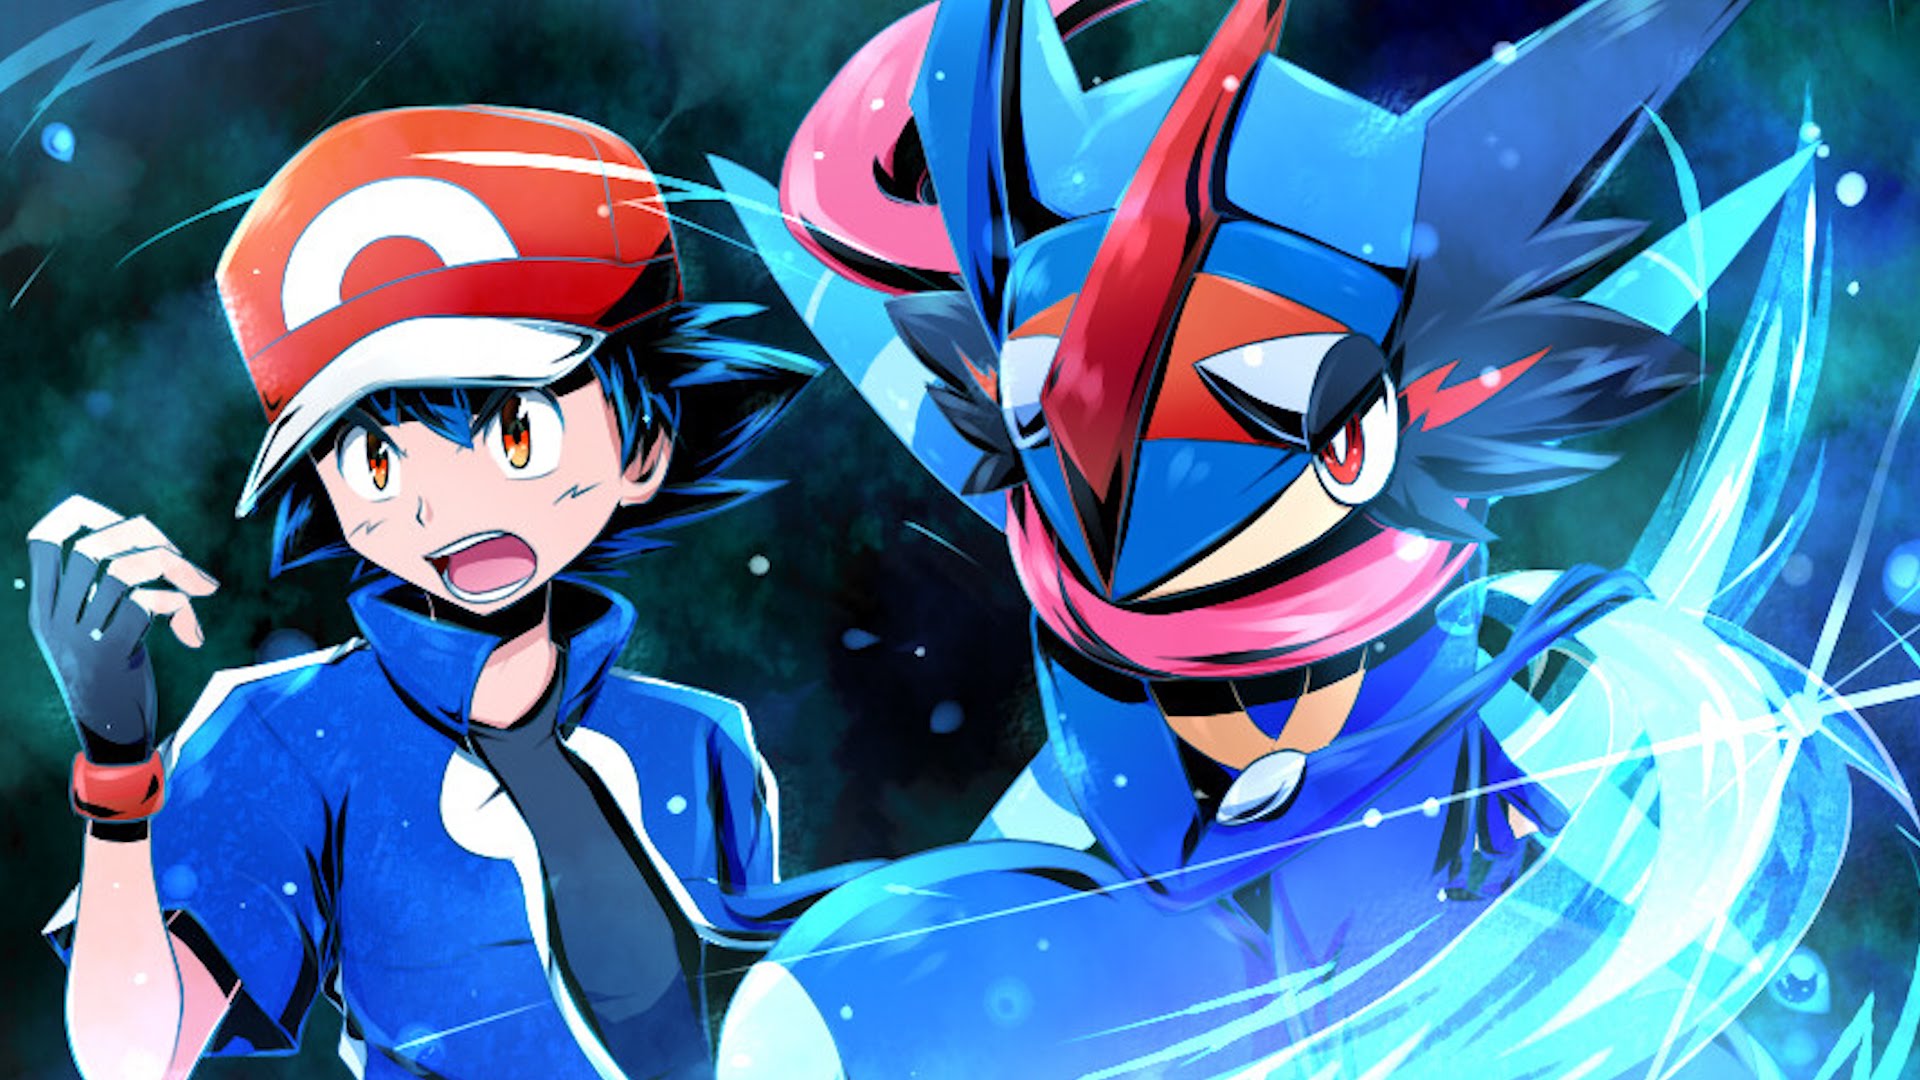 57 - Switch Out to Ash-Greninja.